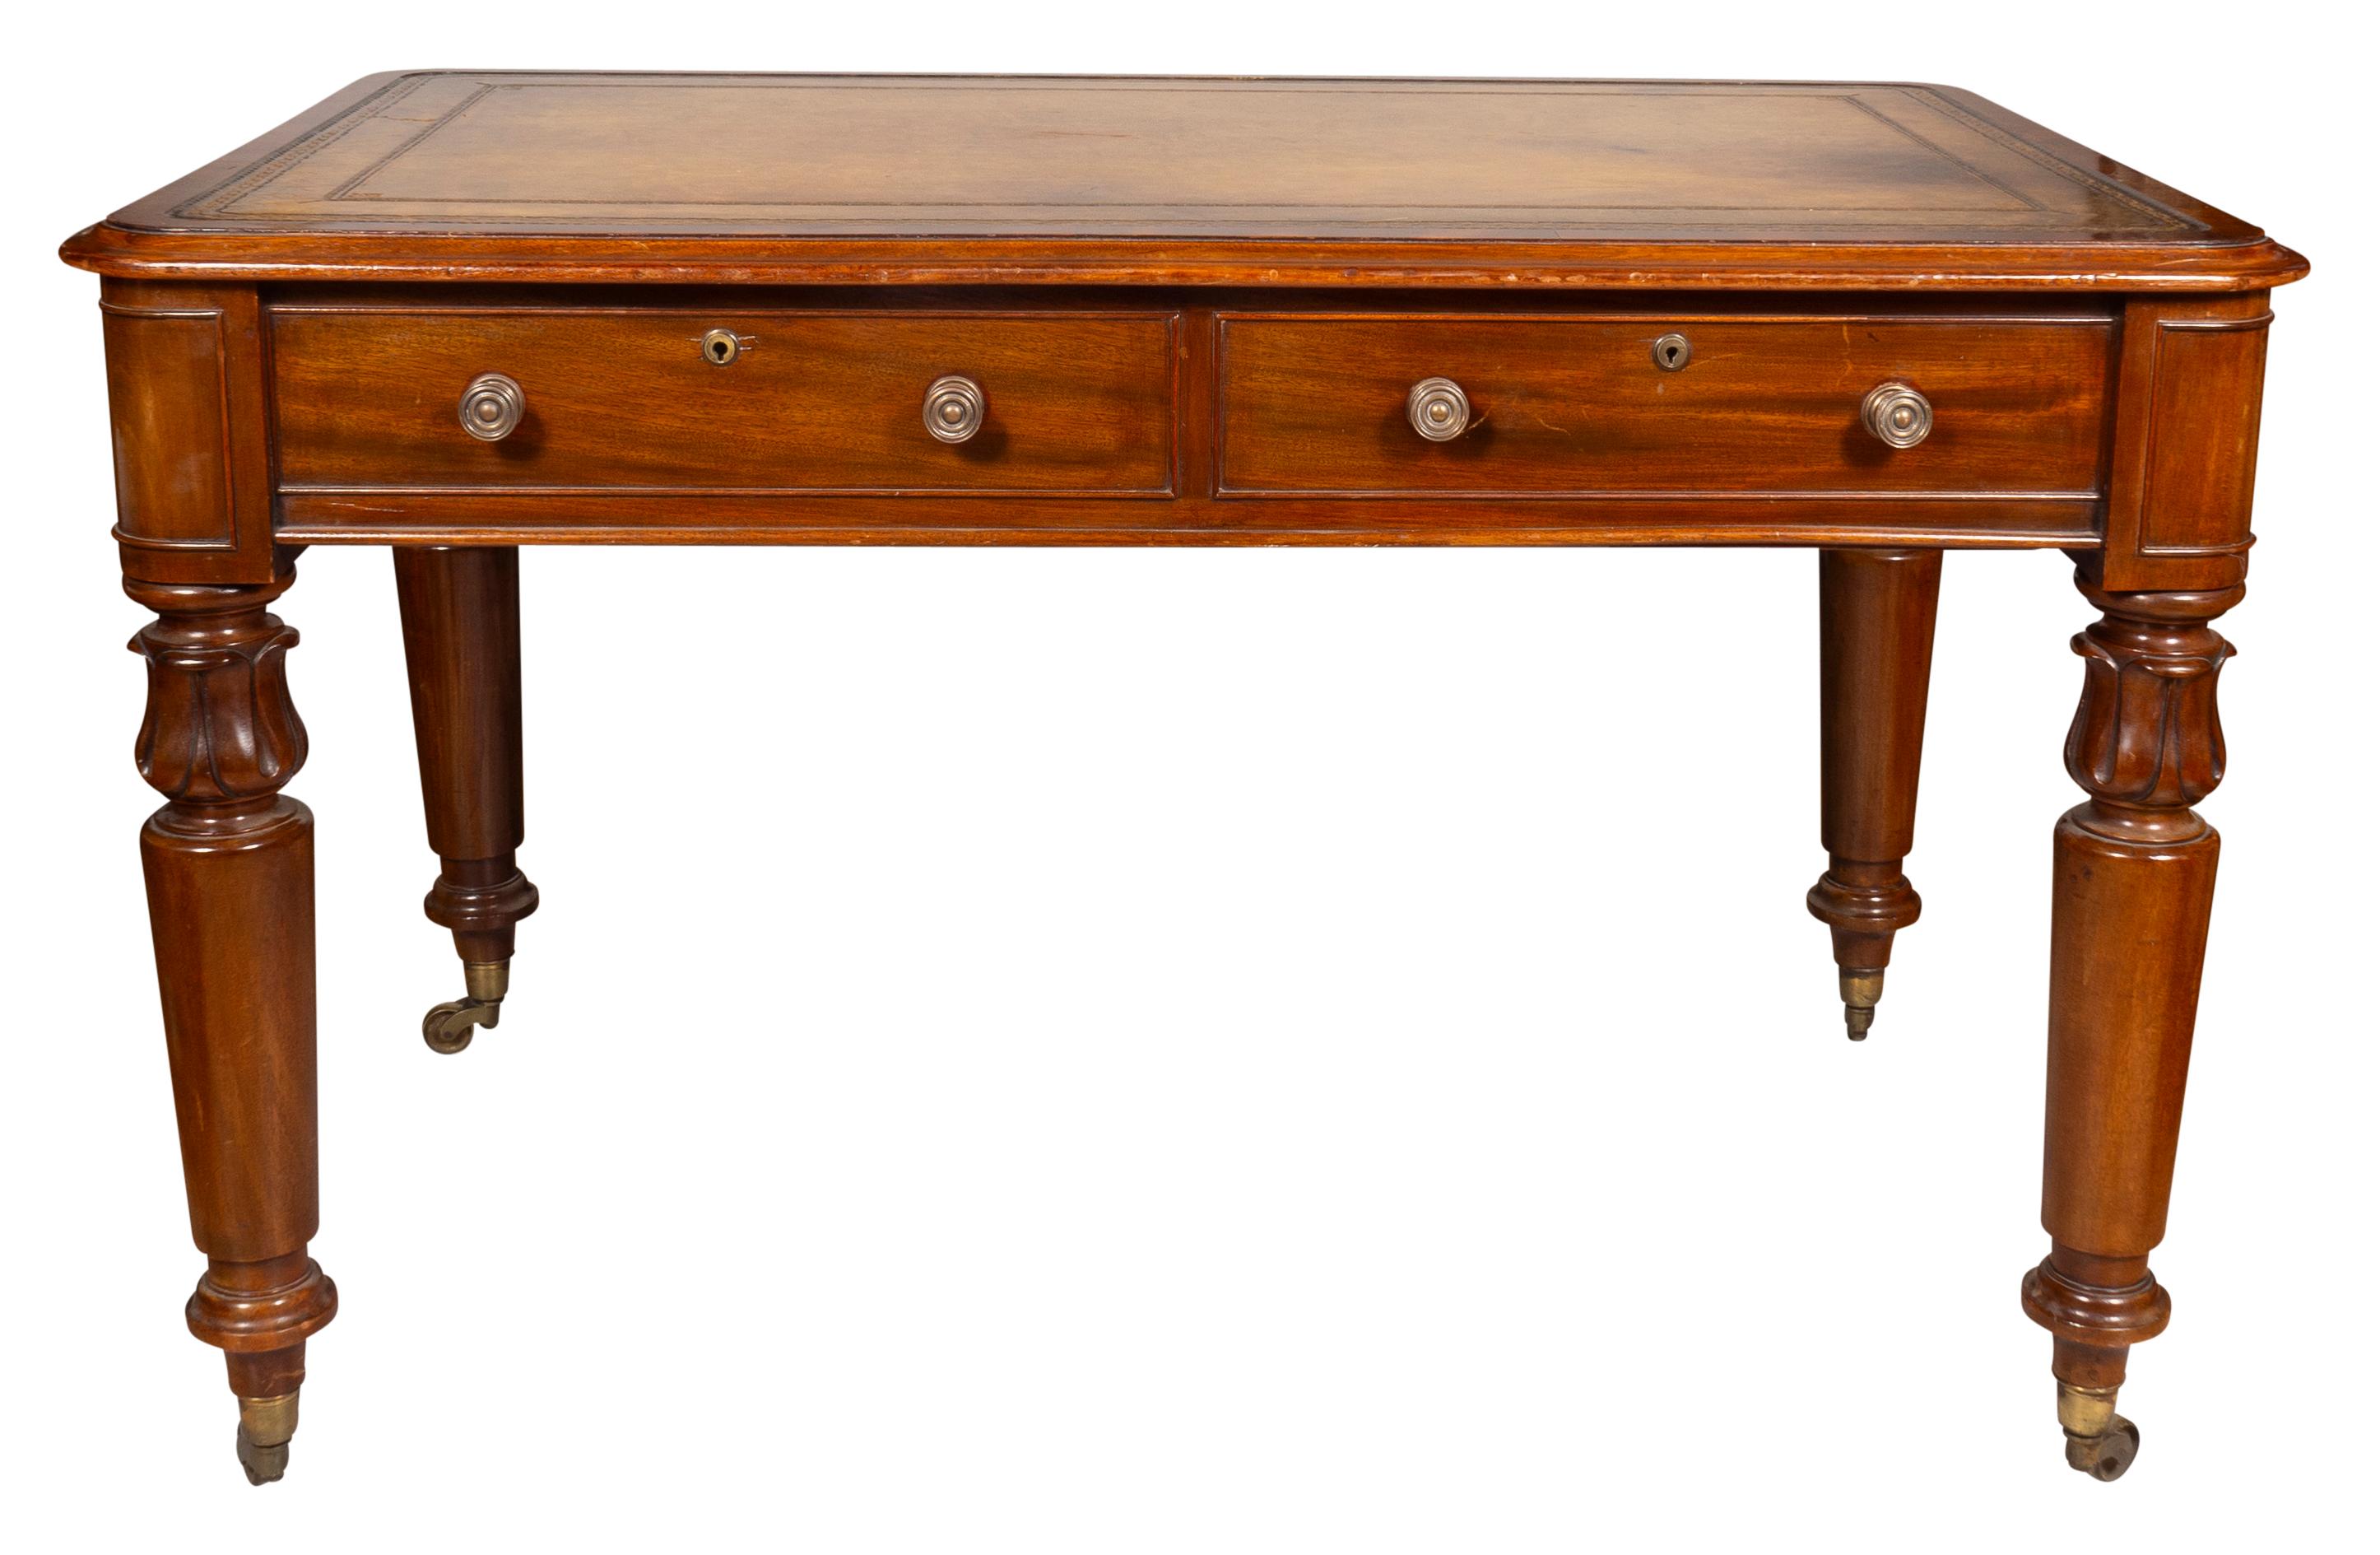 19th Century Early Victorian Mahogany Writing Table With Cope & Collinson Casters For Sale